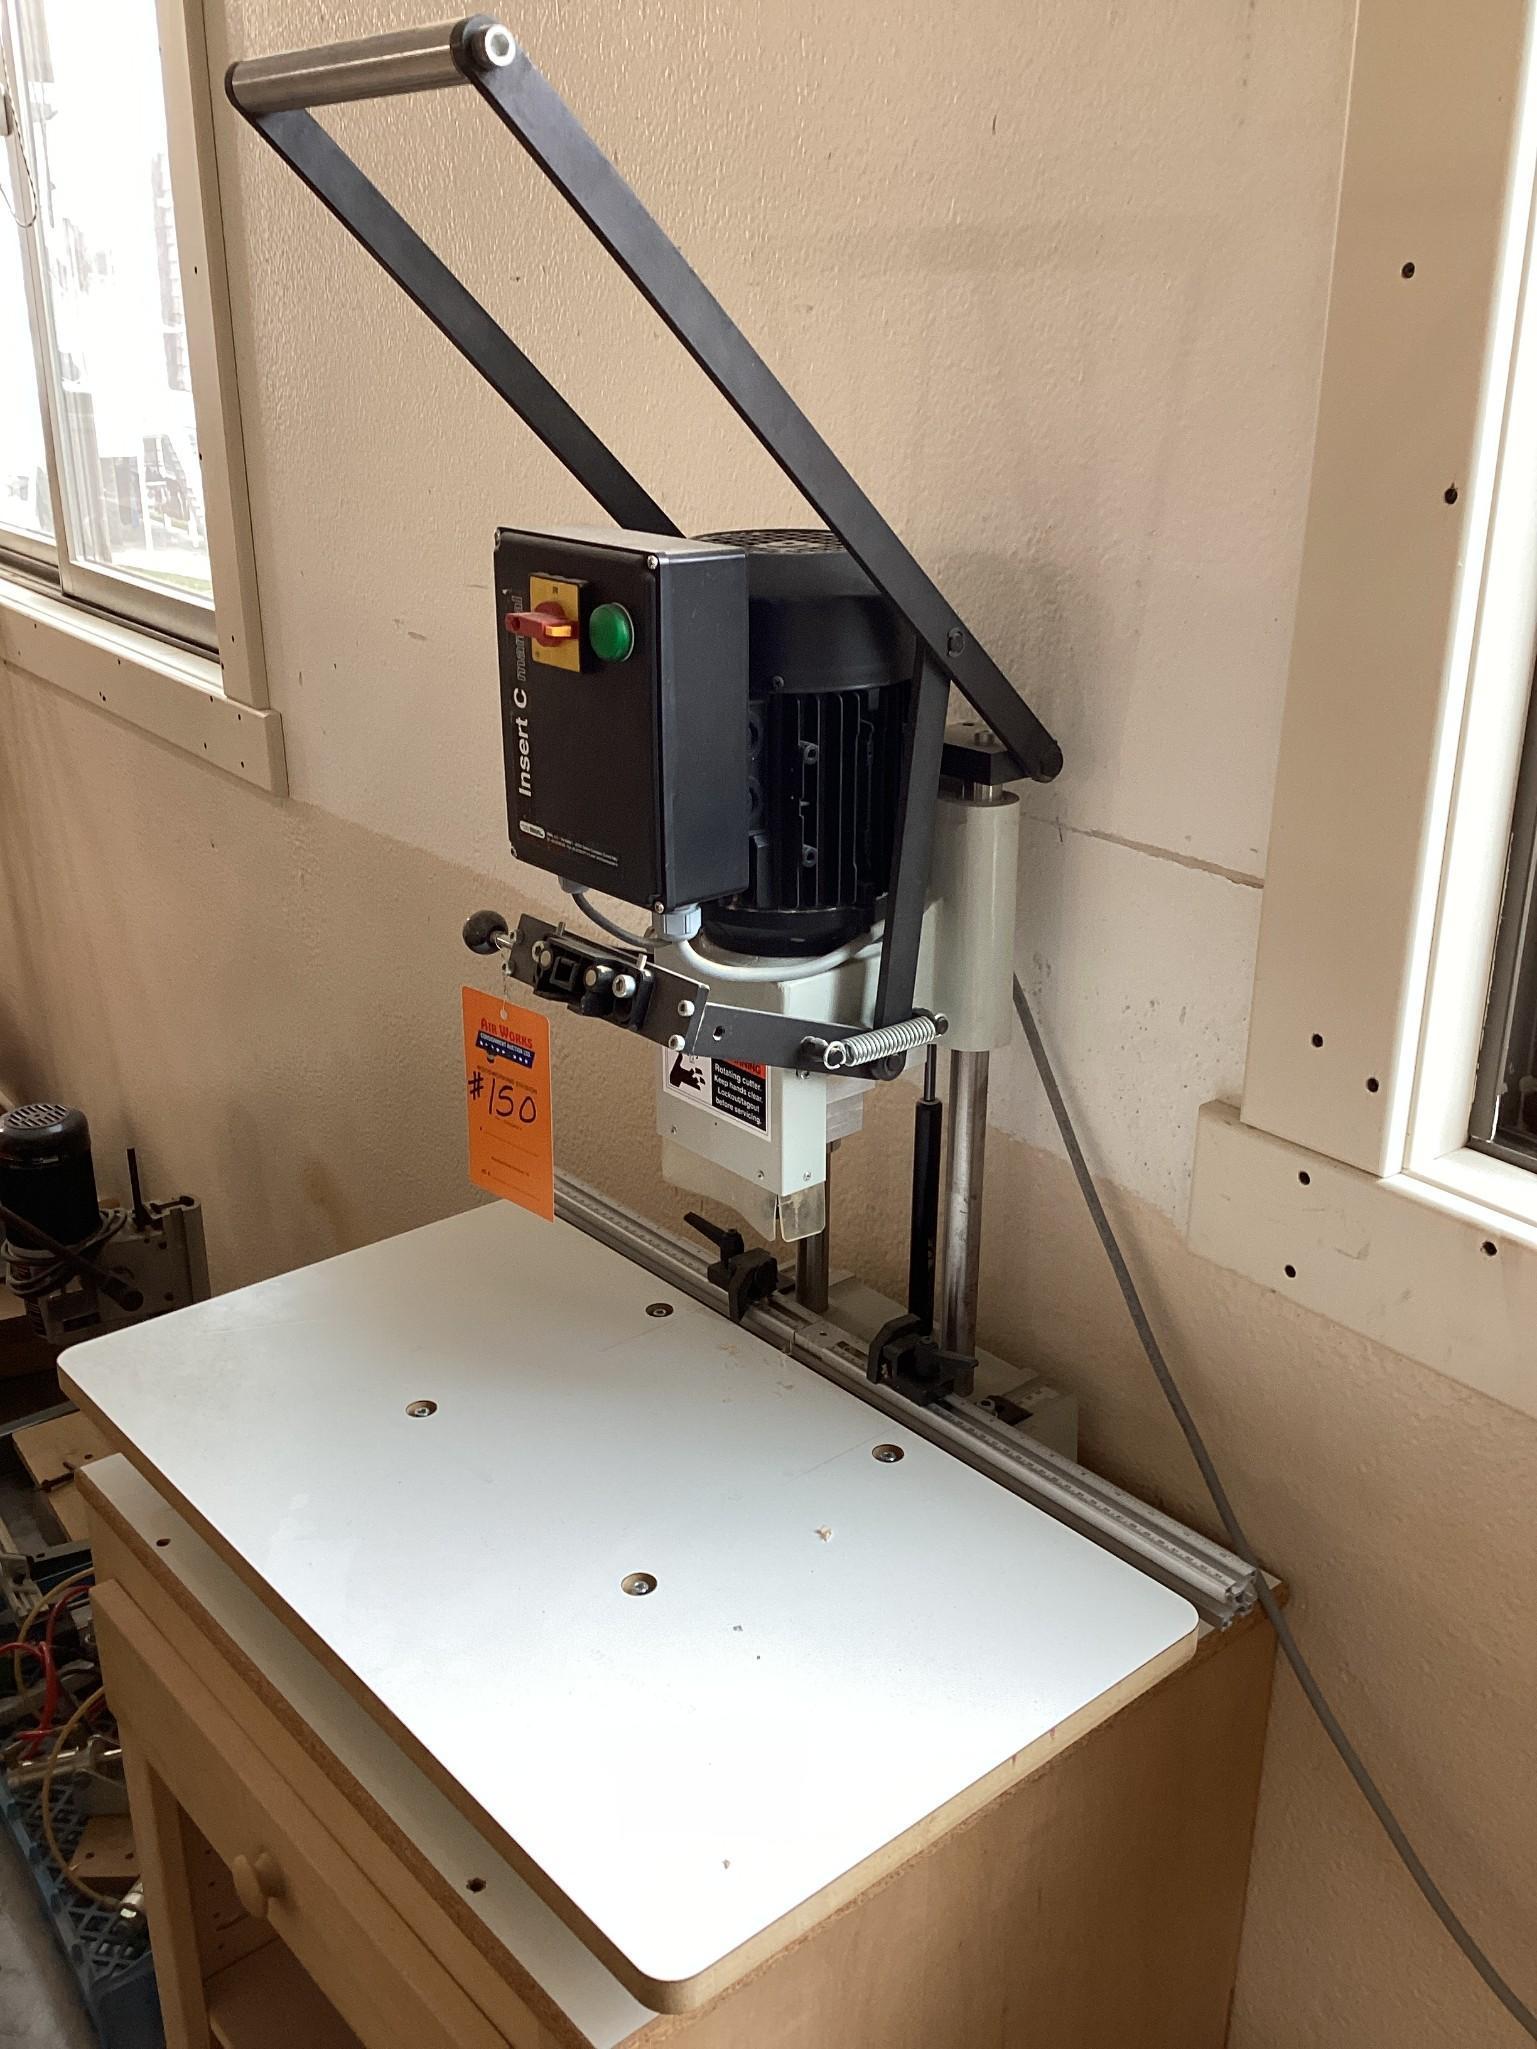 Omal Insert C Hinge Drilling Machine with Stand,110 Volt, In Excellent Working Condition